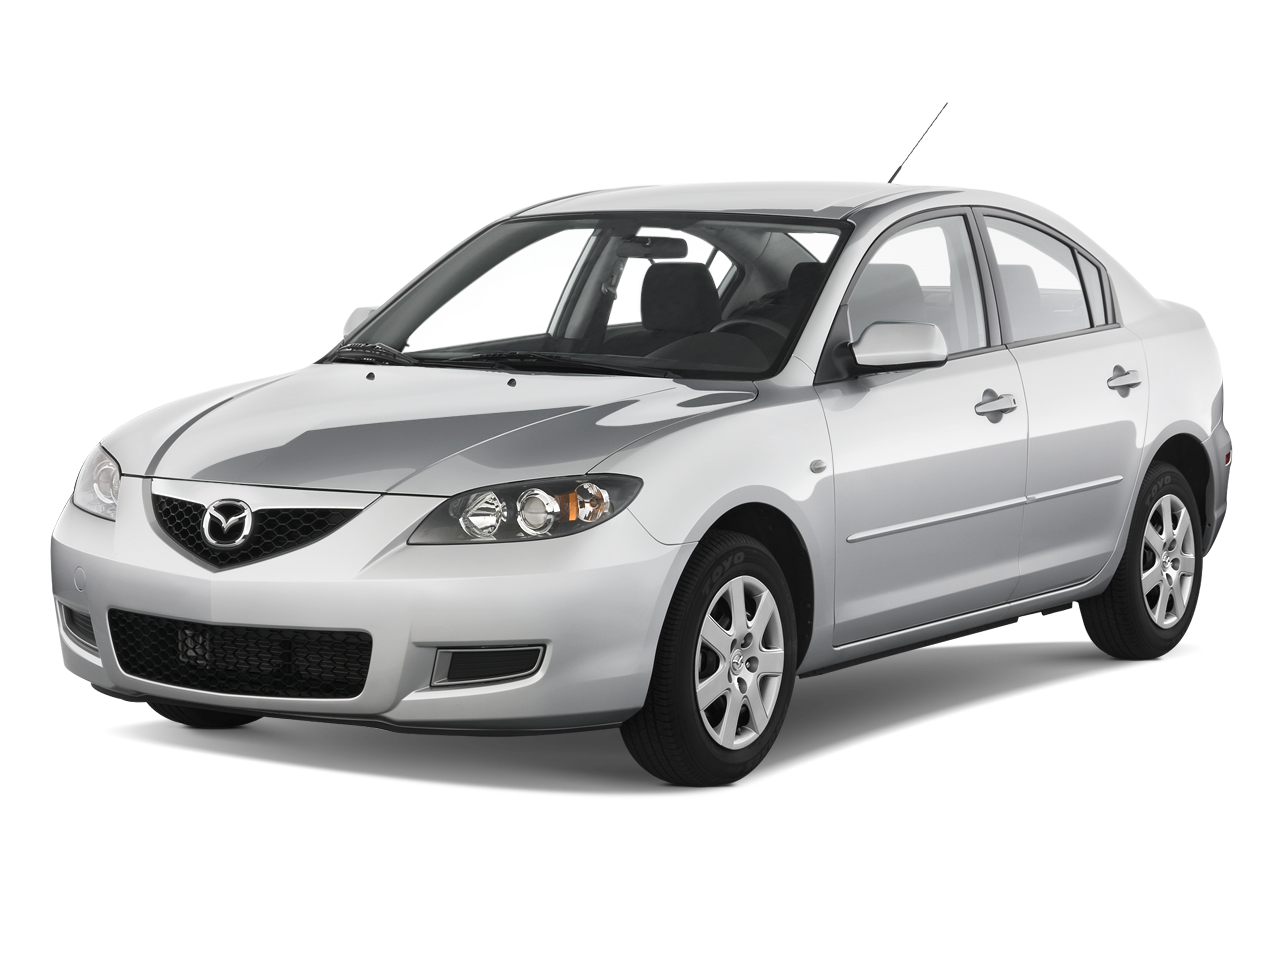 2008 Mazda Mazda3 Prices, Reviews, and Photos - MotorTrend